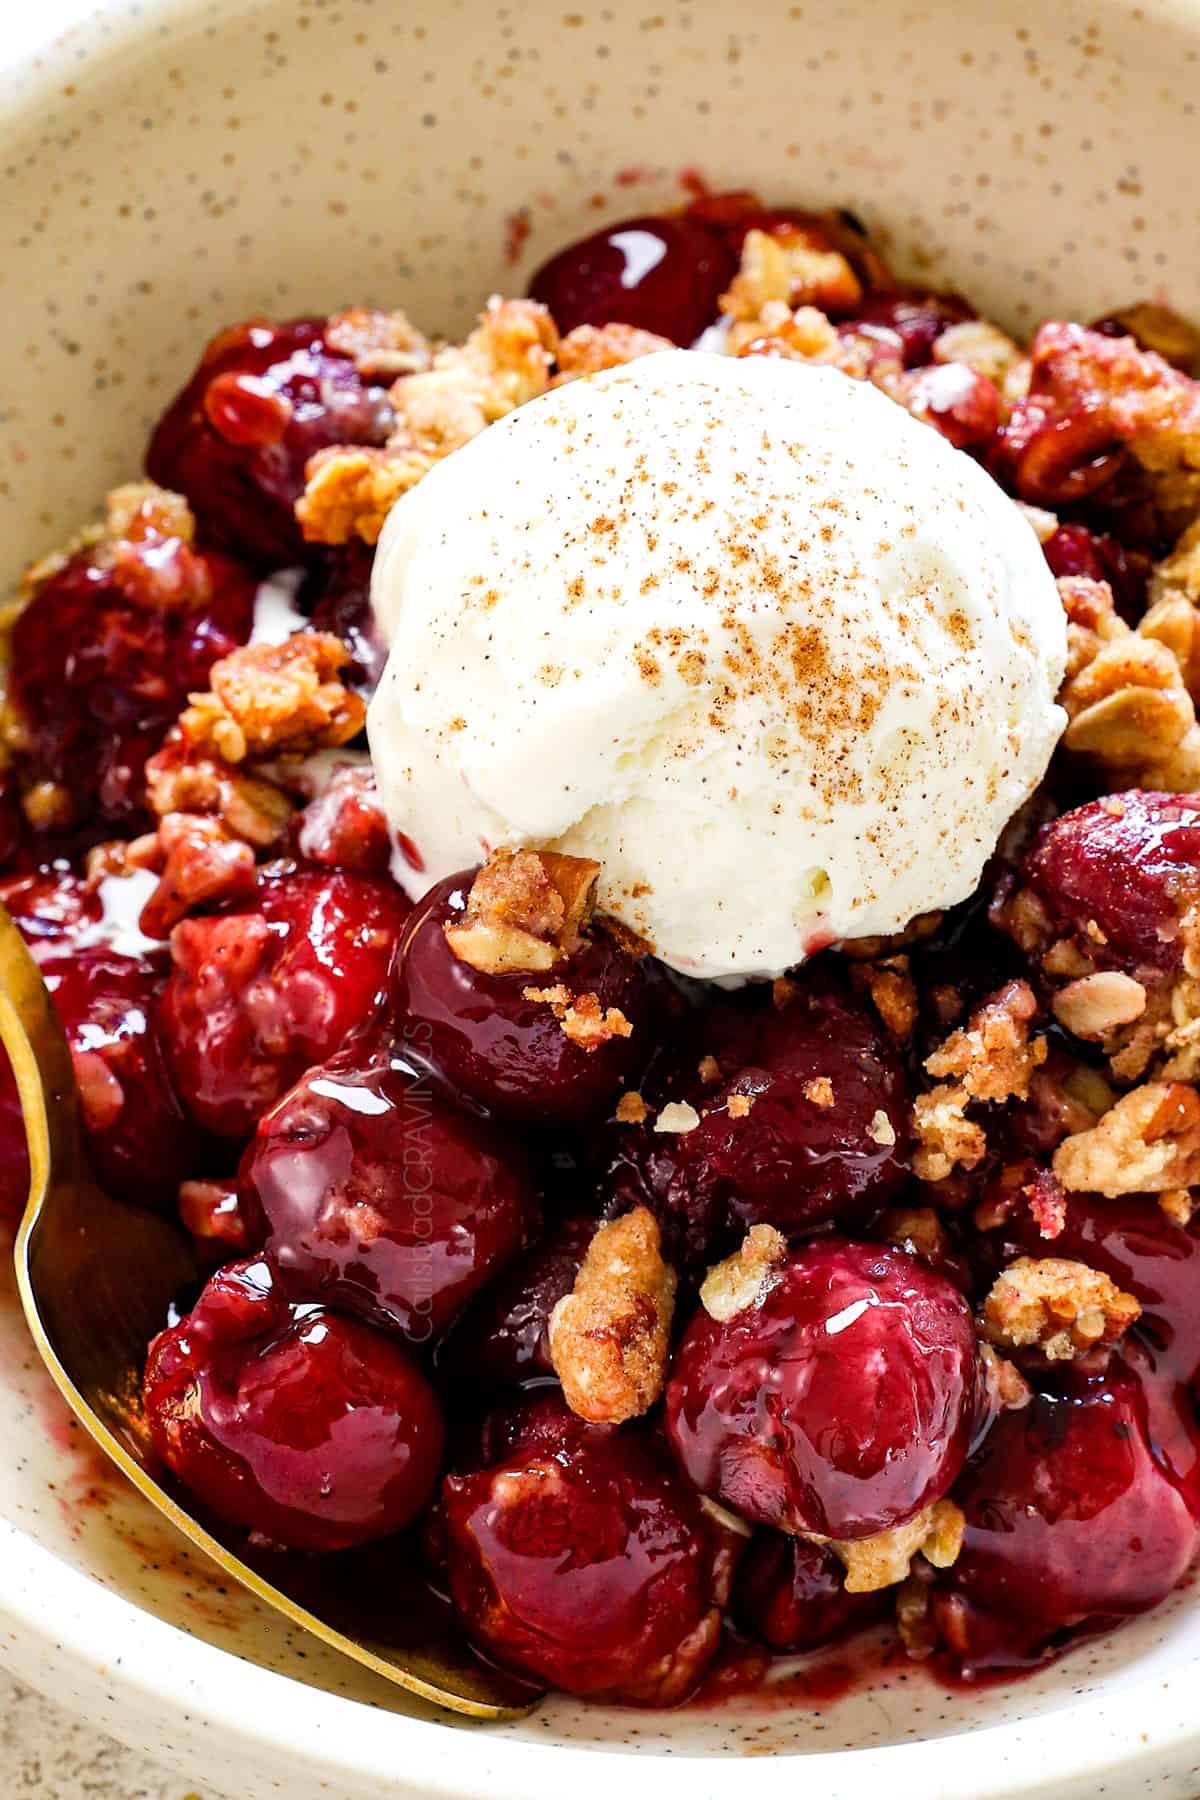 up close of cherry crisp recipe with fresh cherries serve in a bowl showing how juicy the cherries are